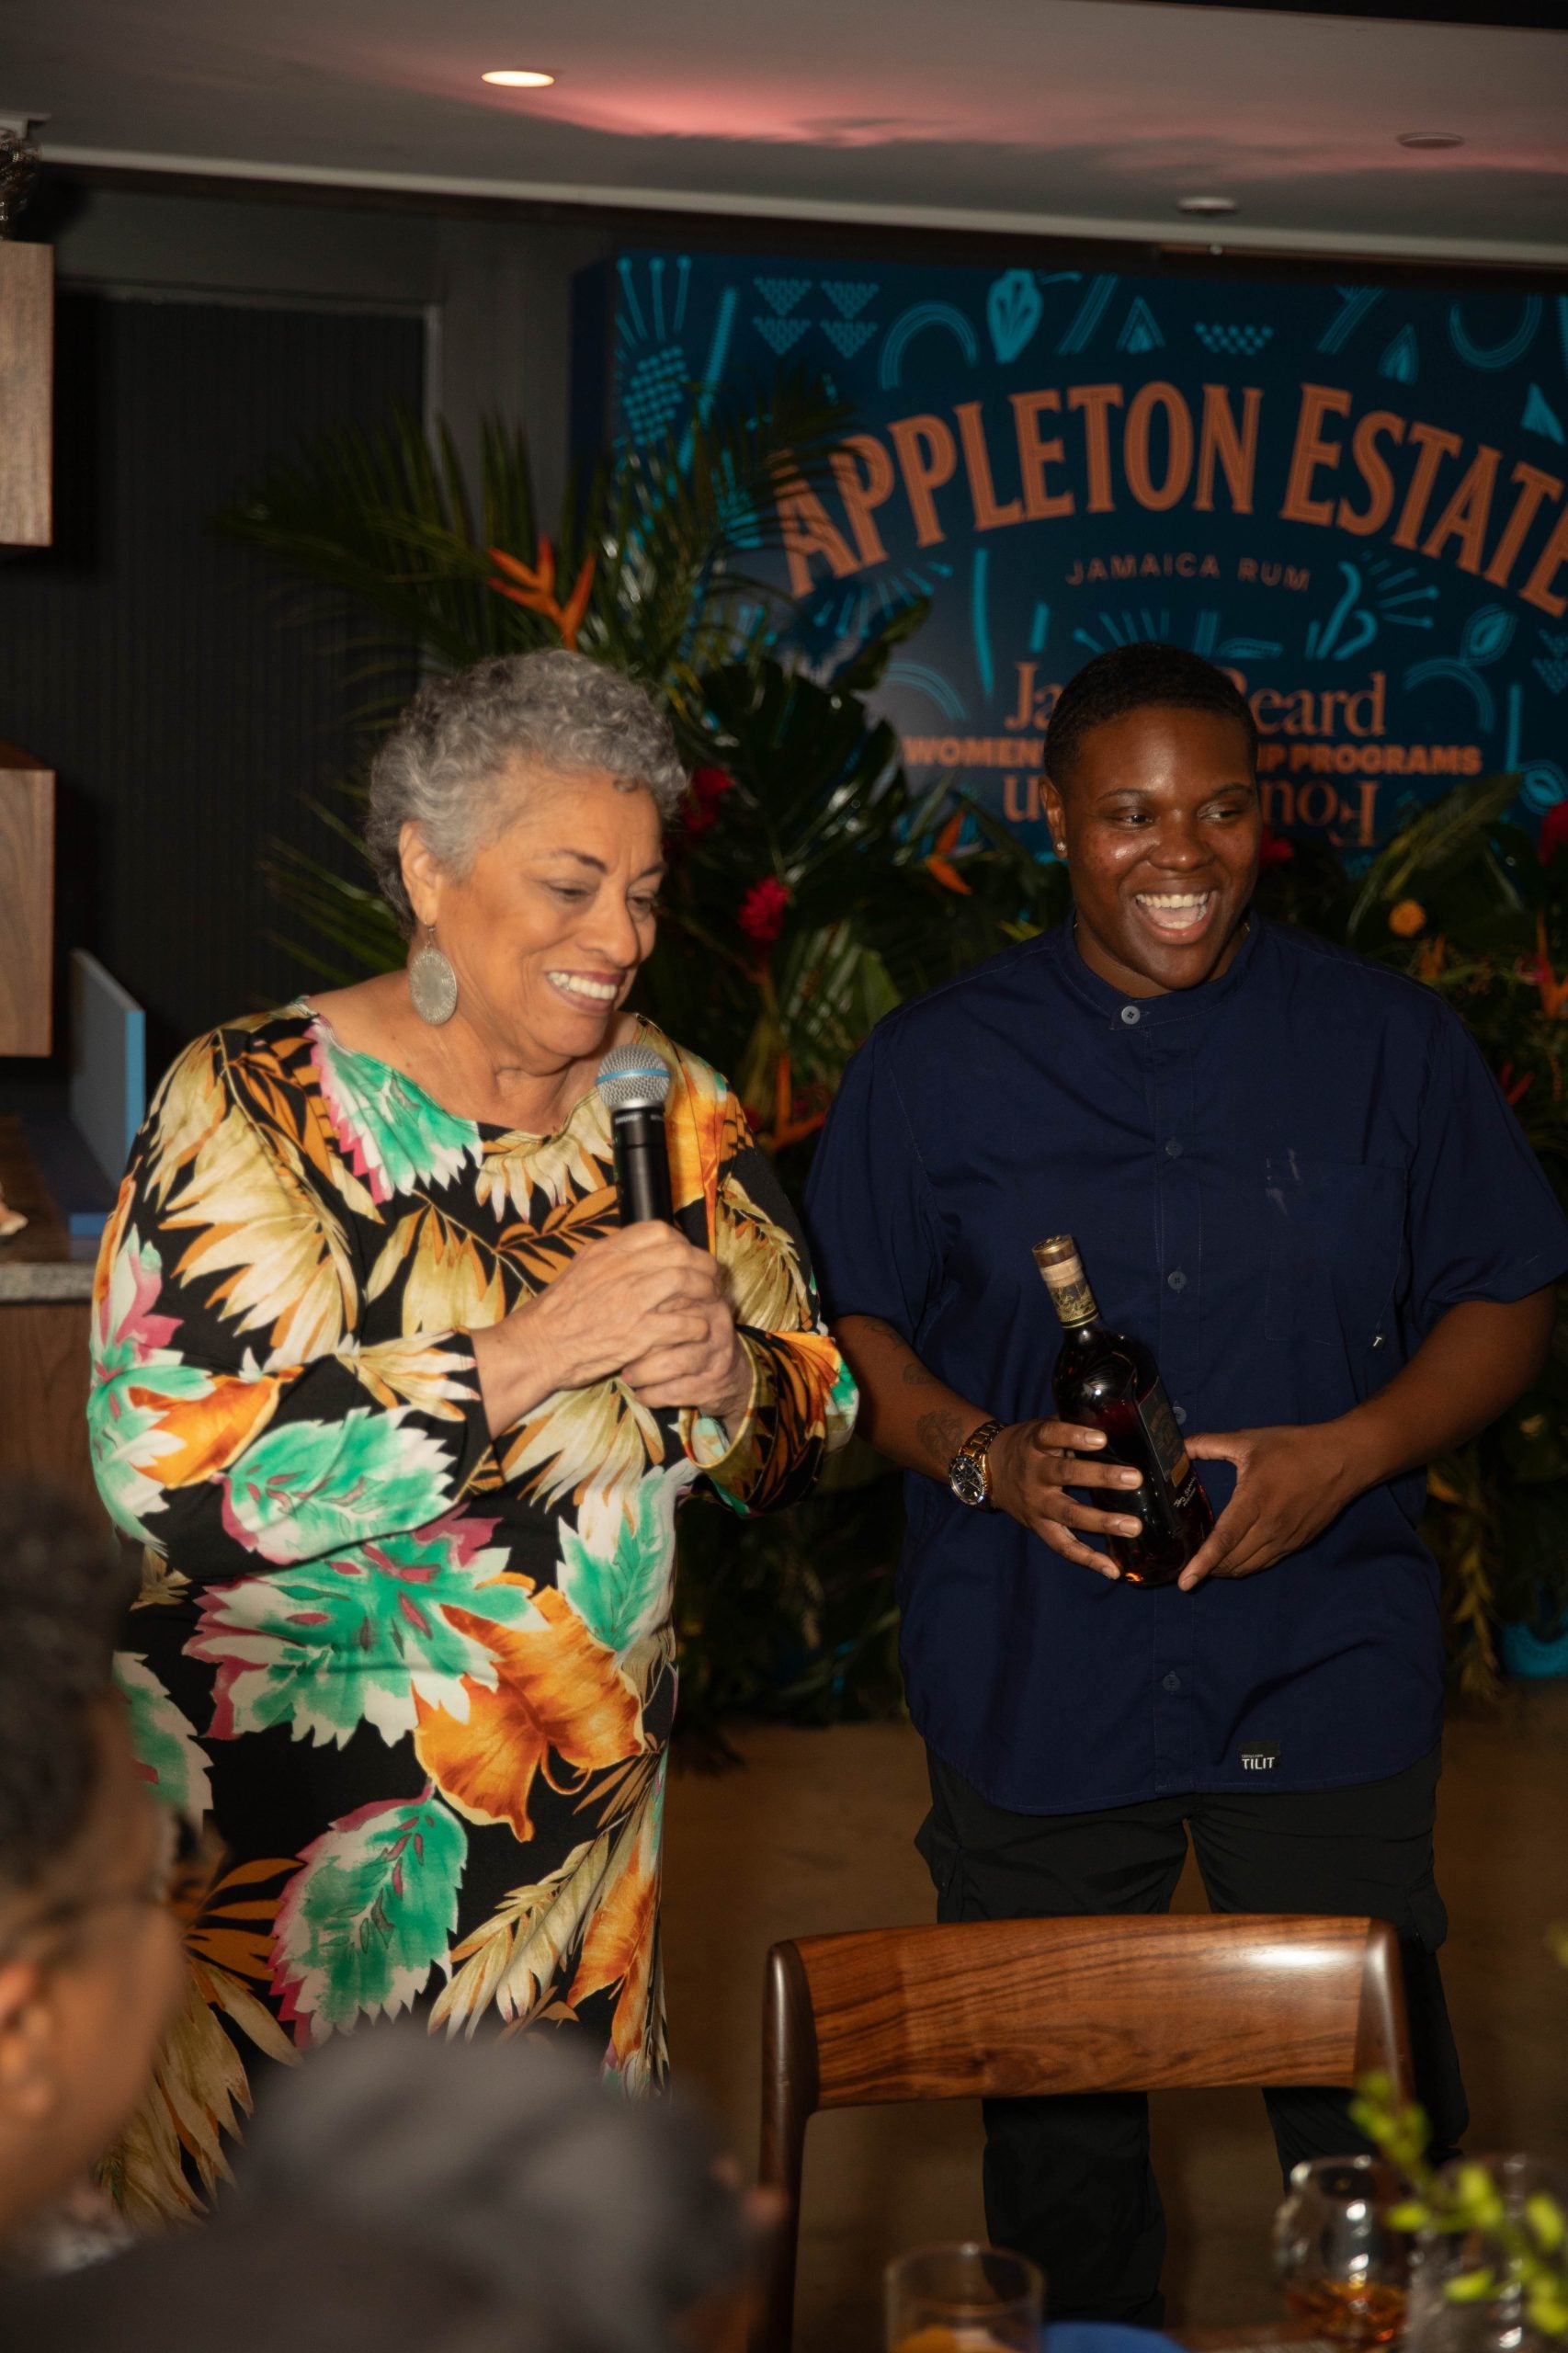 The First Female Master Blender Is A Black Woman. Here’s Why She Values Impact Over Accolades